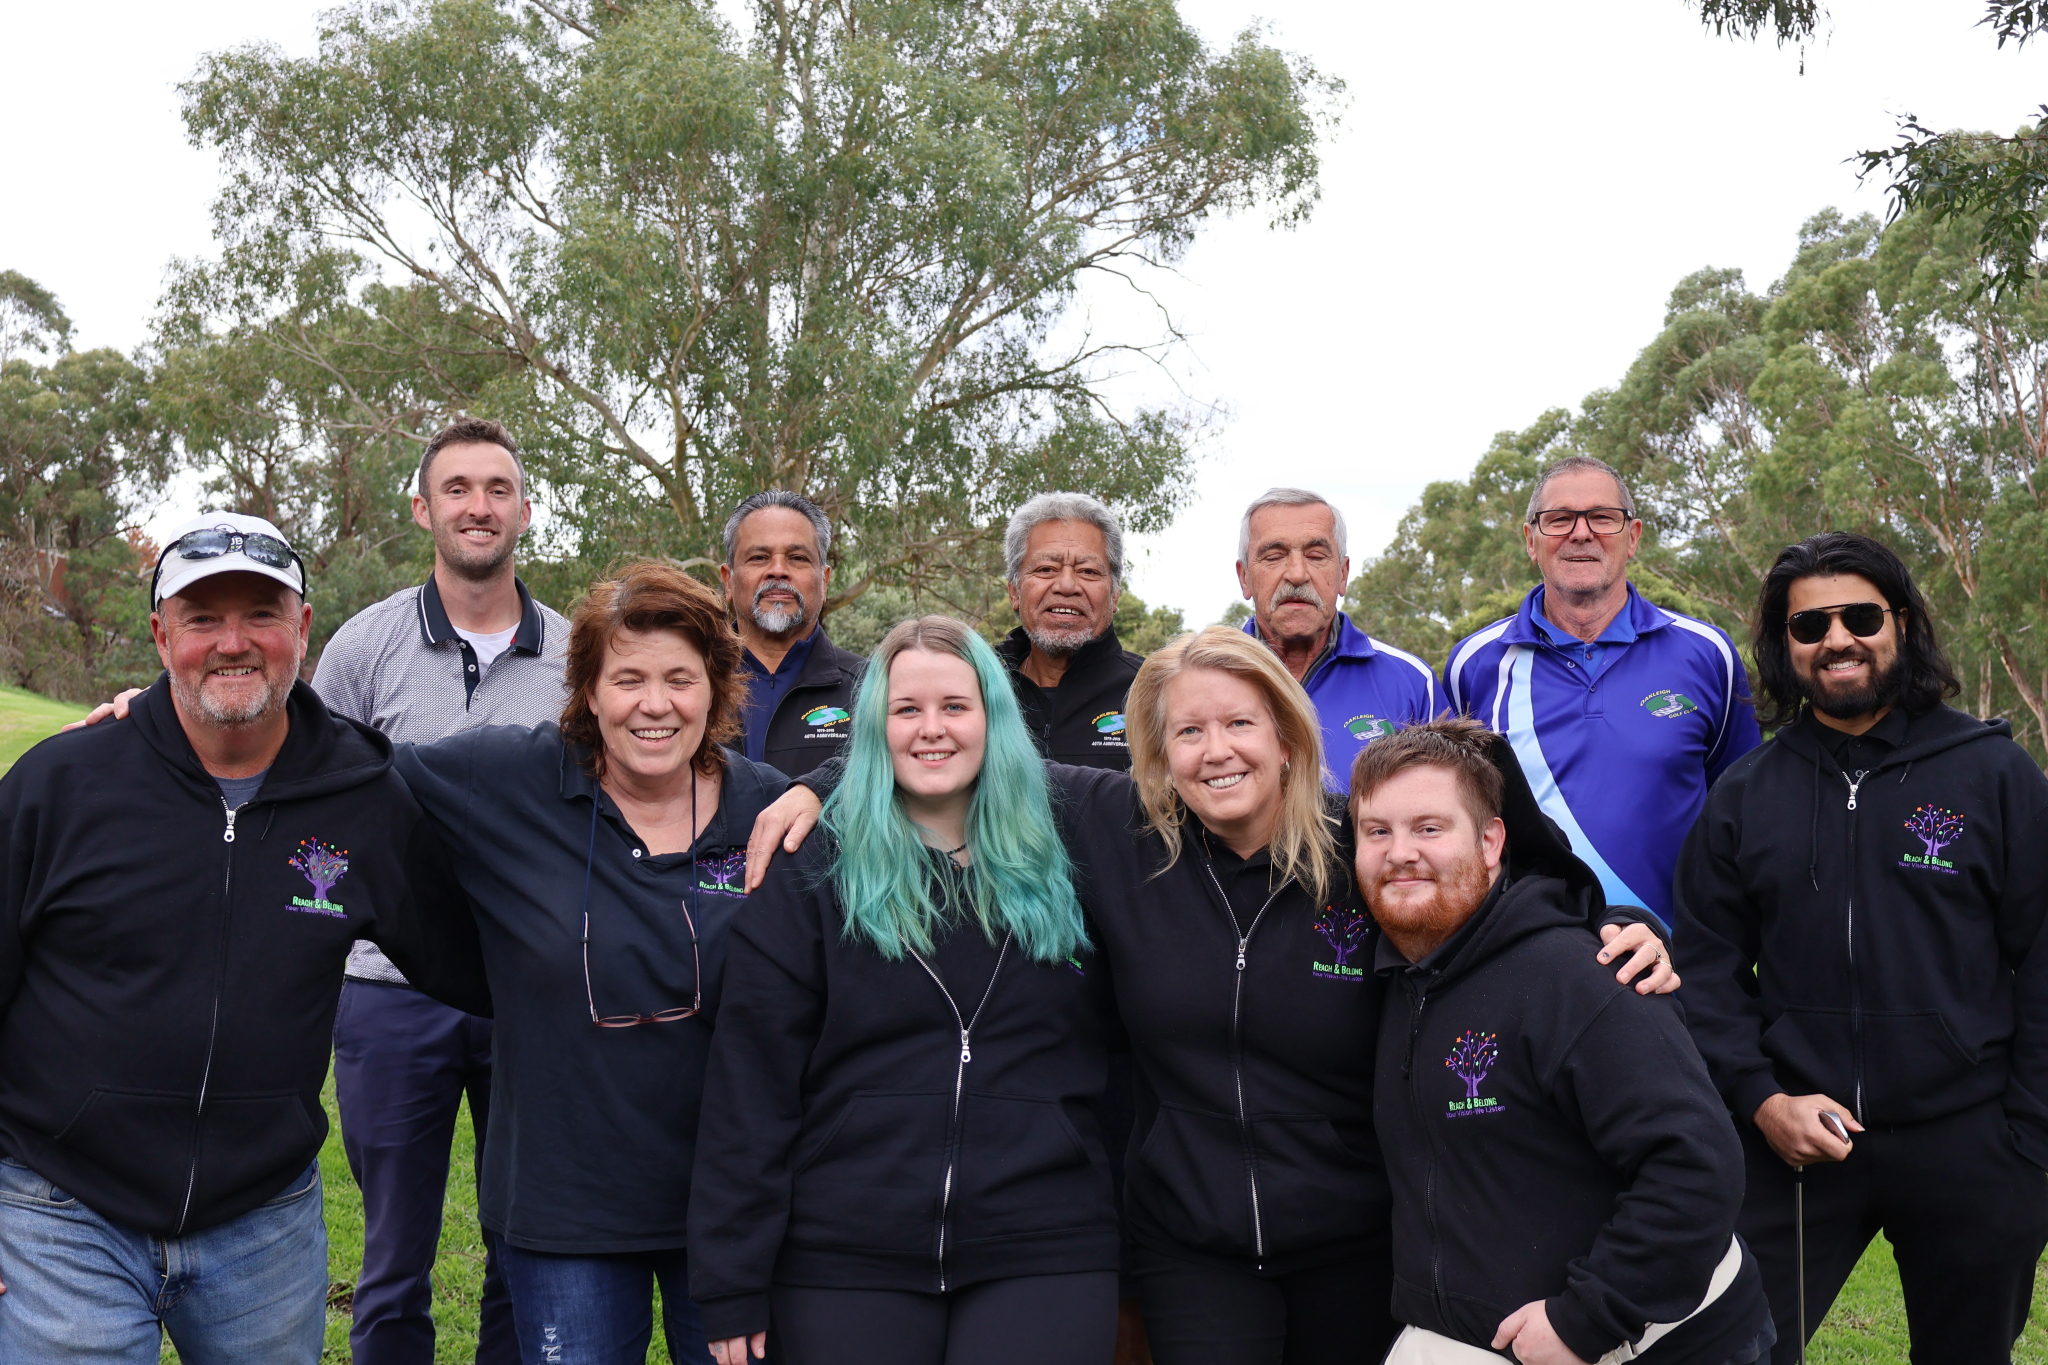 Reach and Belong offers NDIS programs in Oakleigh, including popular golf programs